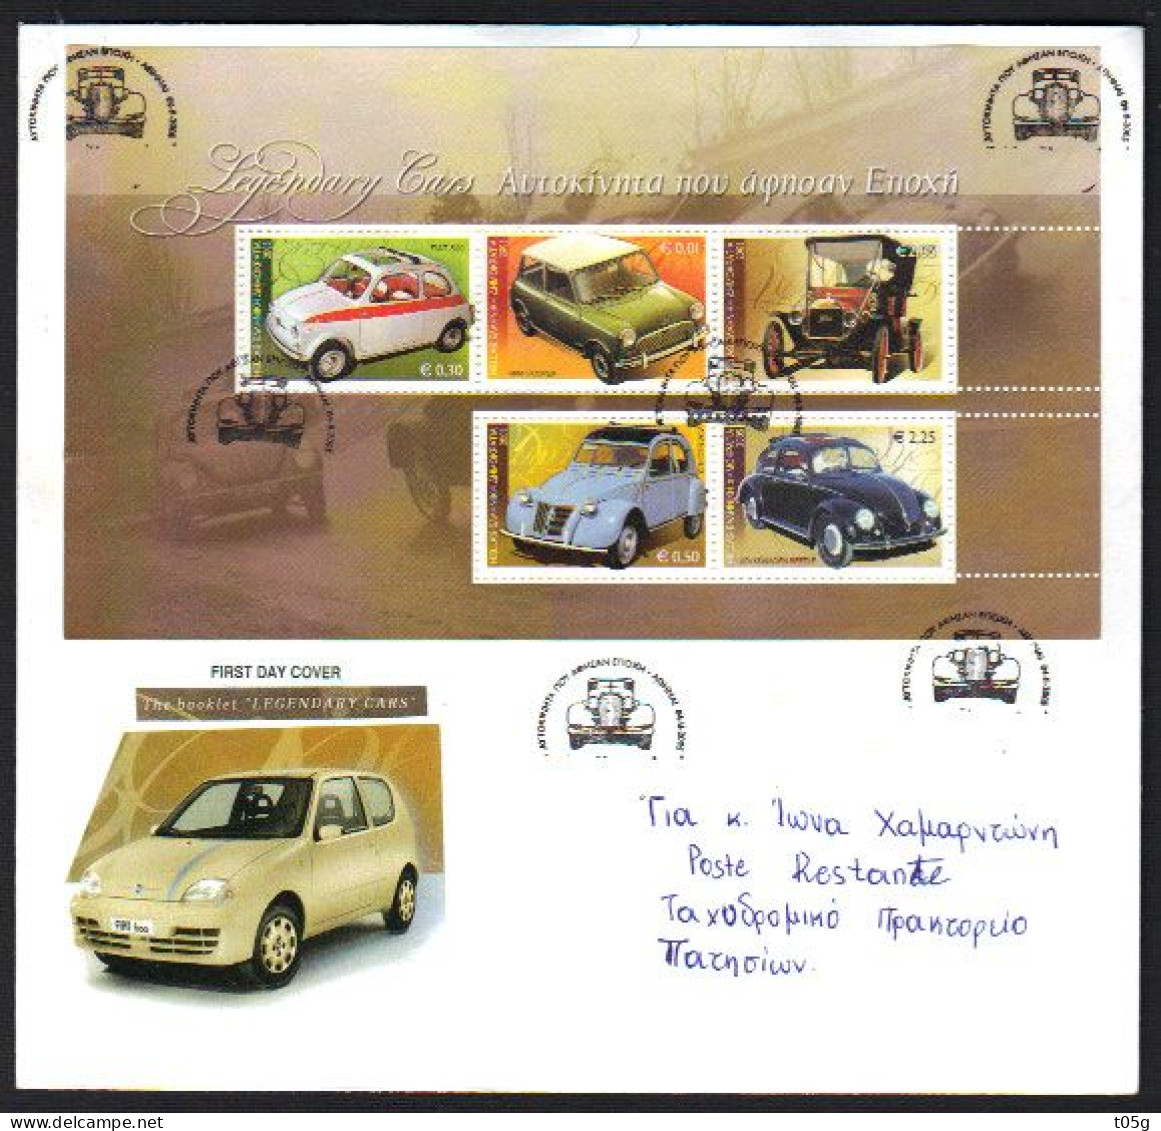 GREECE- GRECE - HELLAS:  FDC 7.X.2005 Sheetlet Of 5 Stmps Fr Booklet Cars - FDC